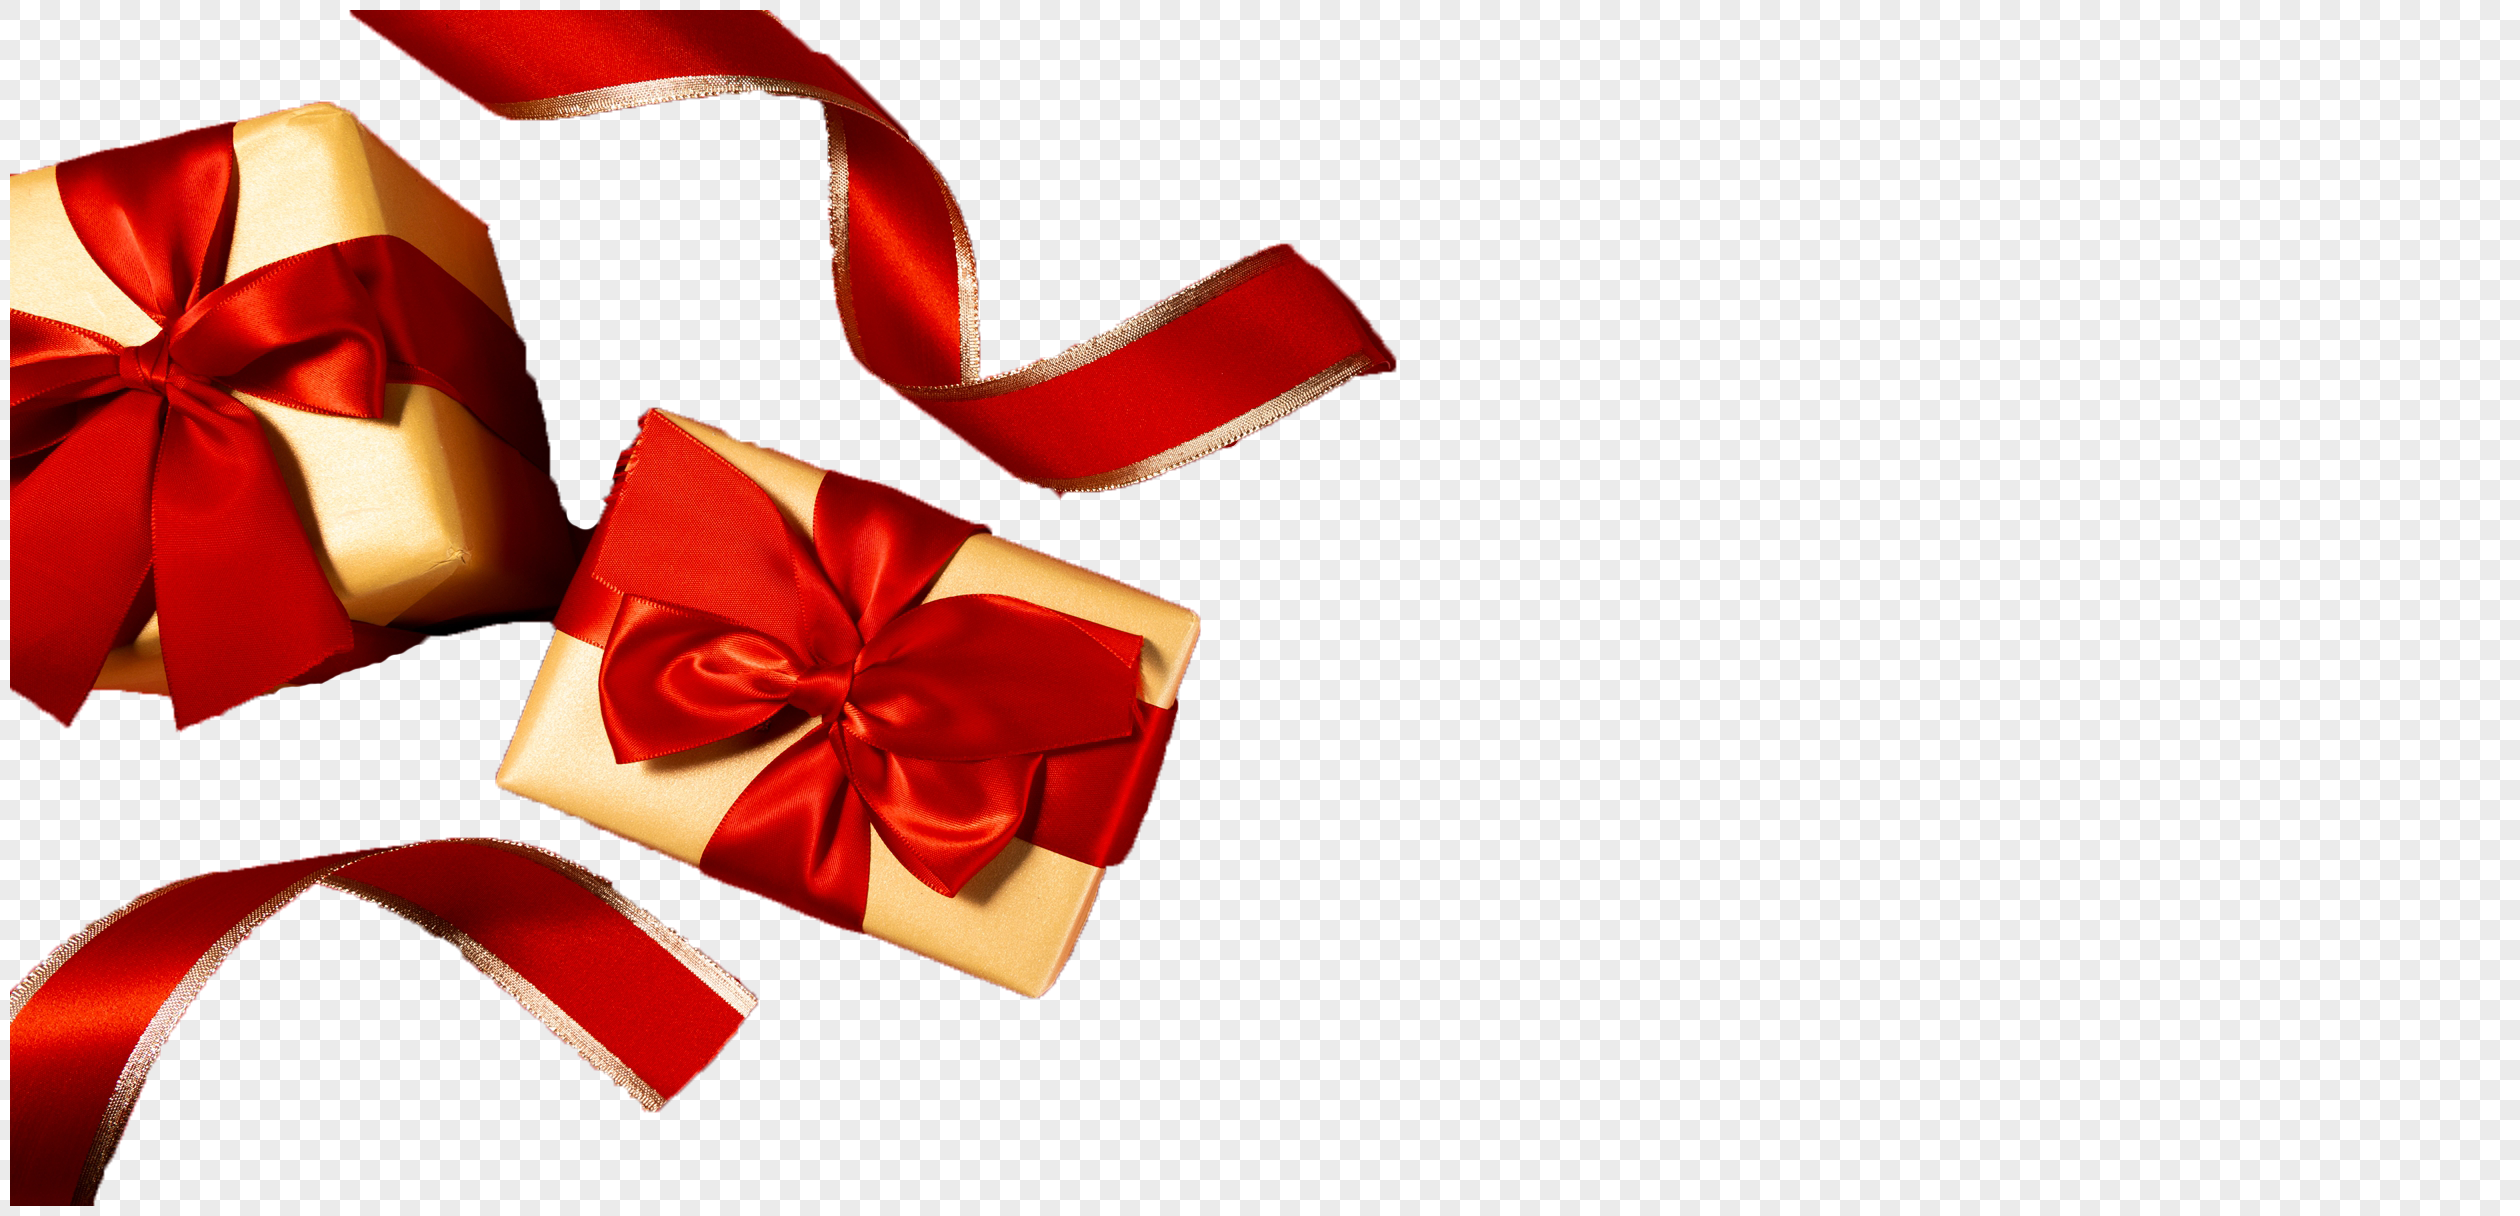 Free: Gift Ribbon Illustration, Lovely golden box collection transparent  background PNG clipart 